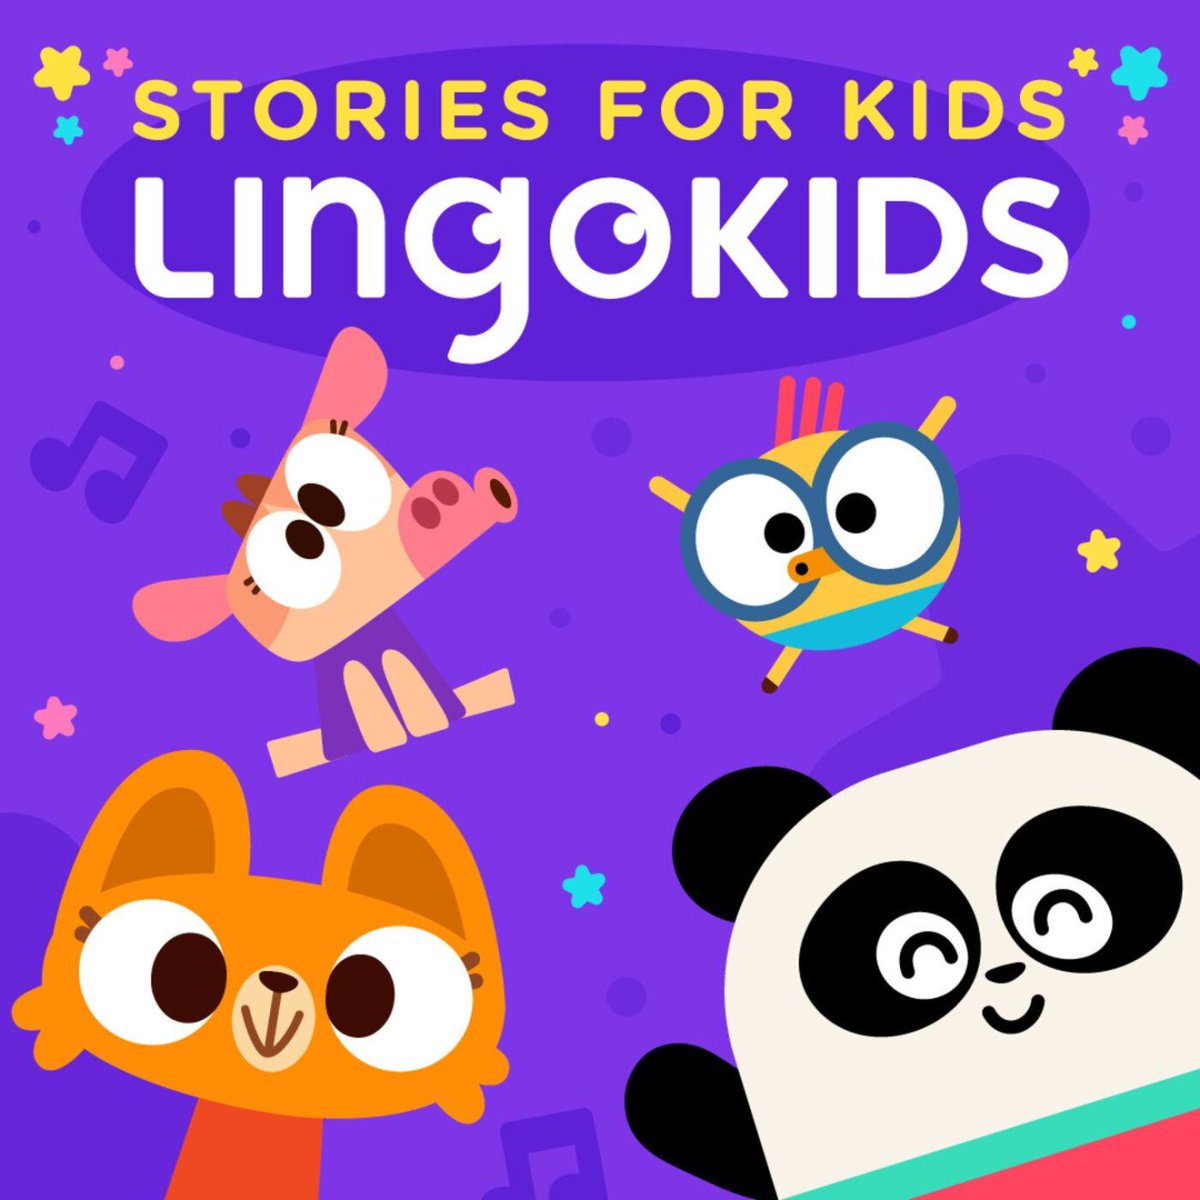 Guess who's part of the #kidslisten creator community? @lingokids the 'playlearning' app has a podcast! Both the app and pod help kids ages 2+ learn and develop through educational songs and games! Add them to your little one's playlist: apple.co/3PYjvWL